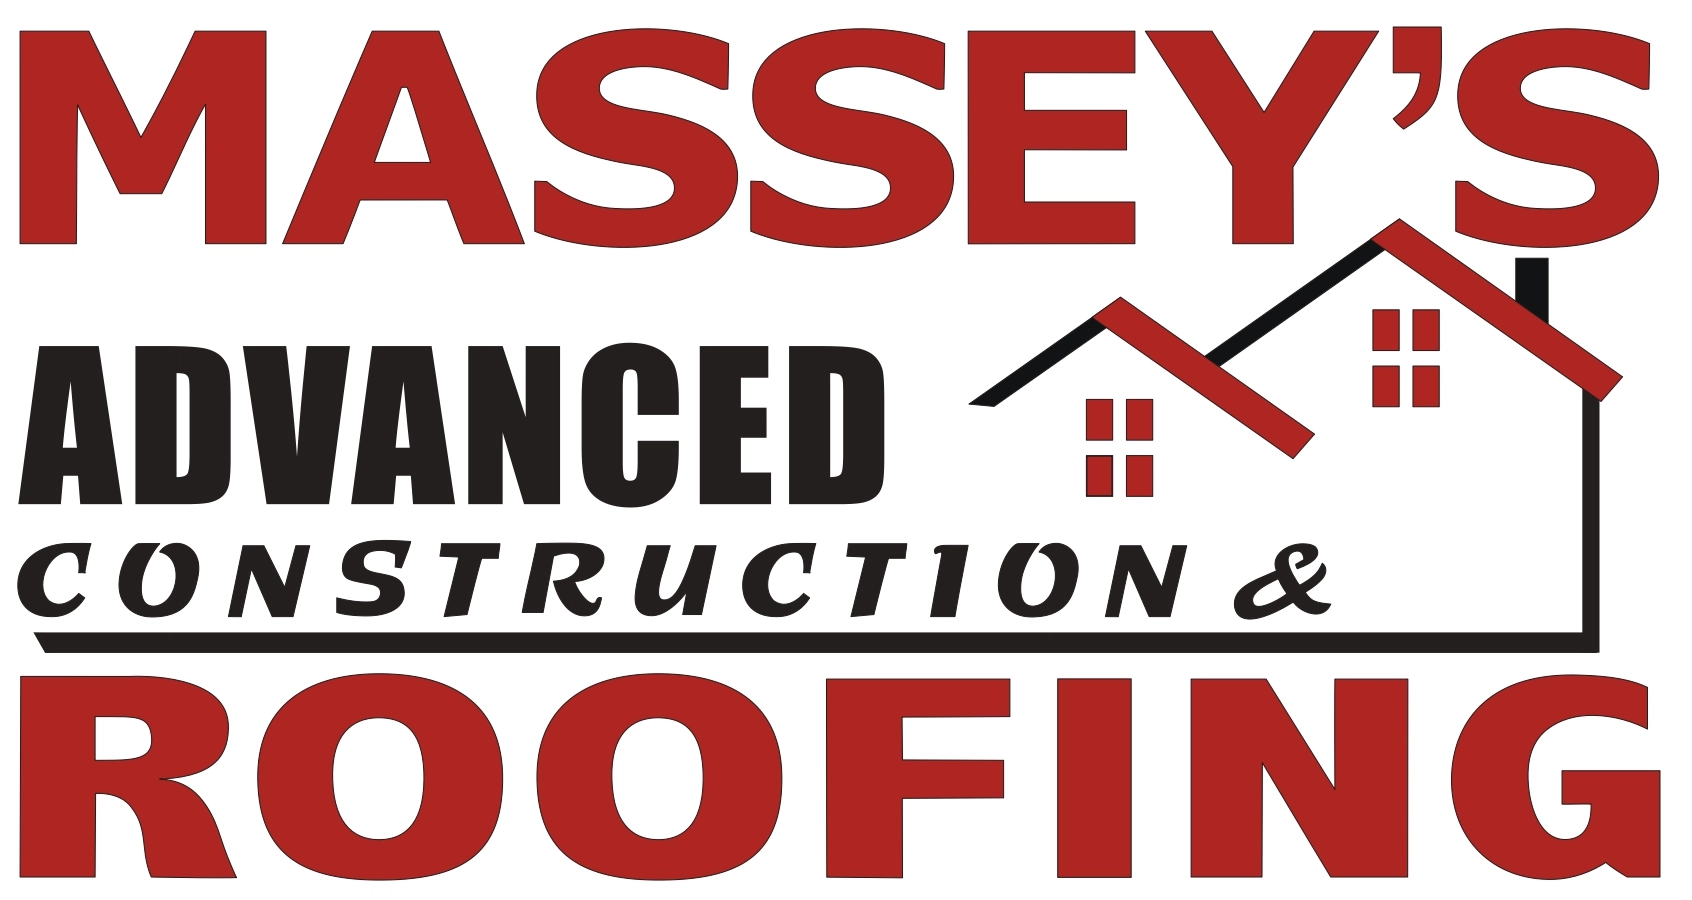 Massey's Advanced Construction & Roofing Logo